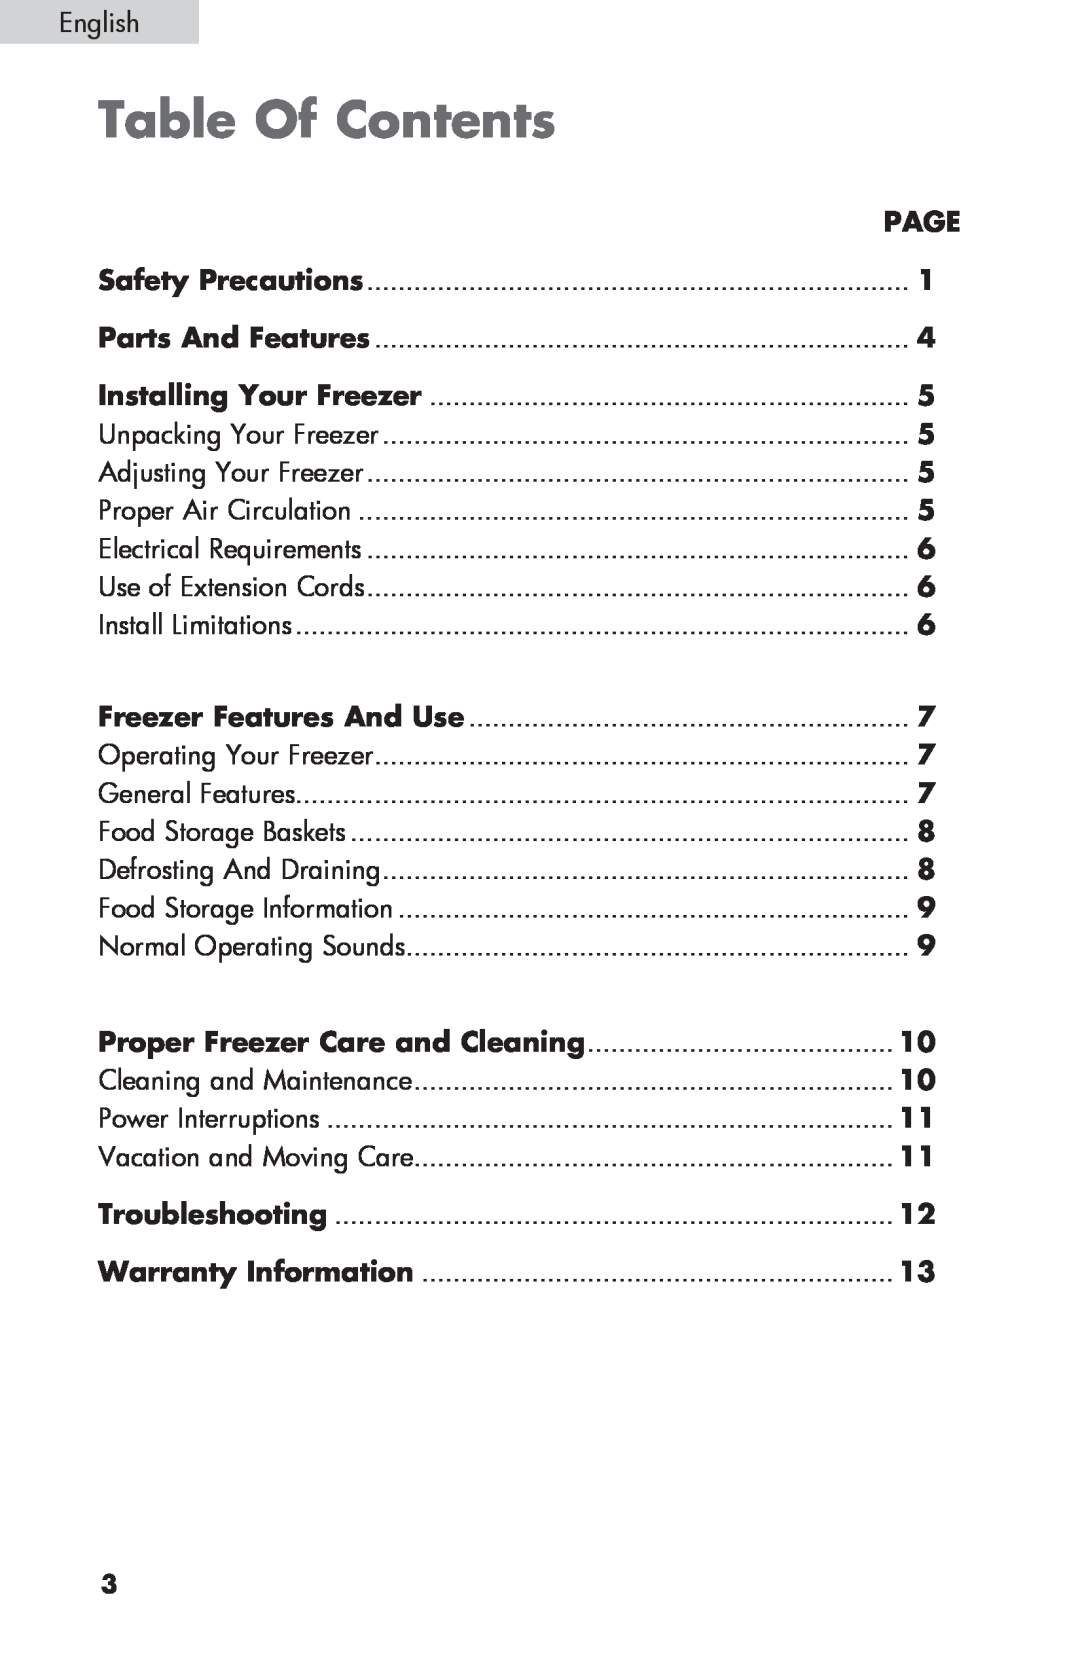 Sanyo HF-710 instruction manual Table Of Contents, English, Page, Proper Freezer Care and Cleaning, Warranty Information 